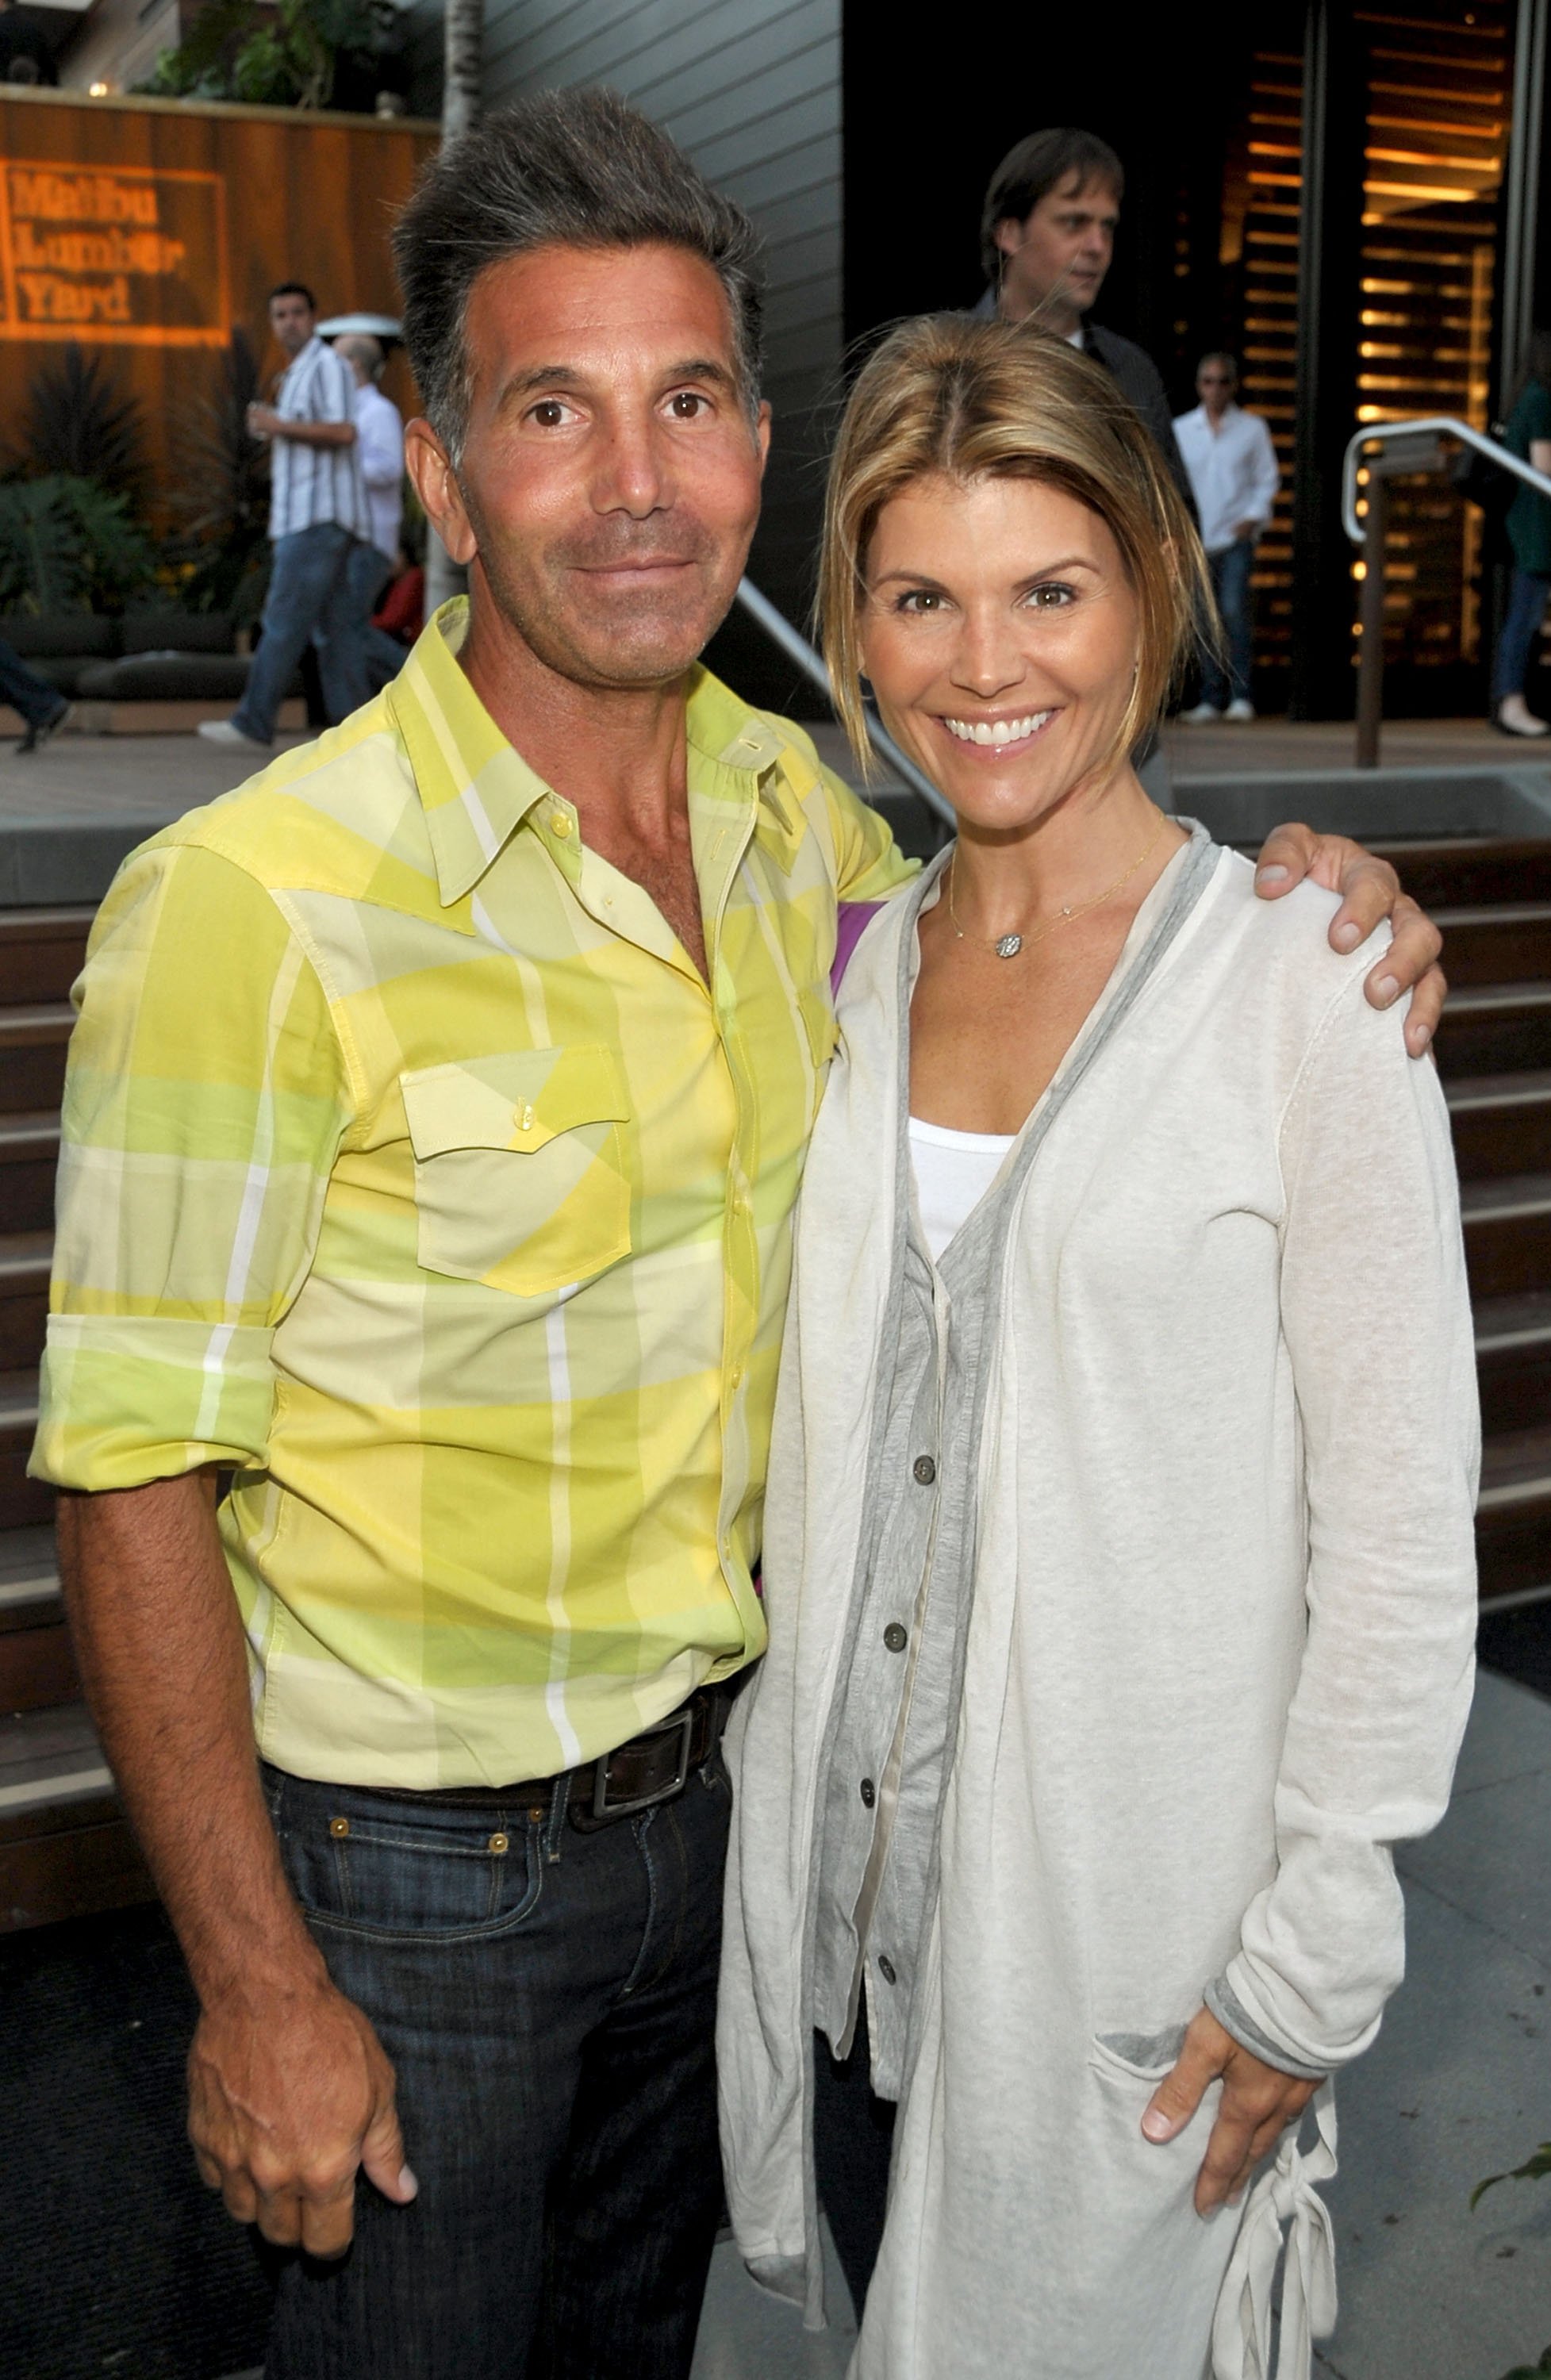 Mossimo Giannulli and actress Lori Loughlin attend the Malibu Lumber Yard grand opening at the Malibu Lumber Yard on April 21, 2009 in Malibu, California | Photo: Getty Images